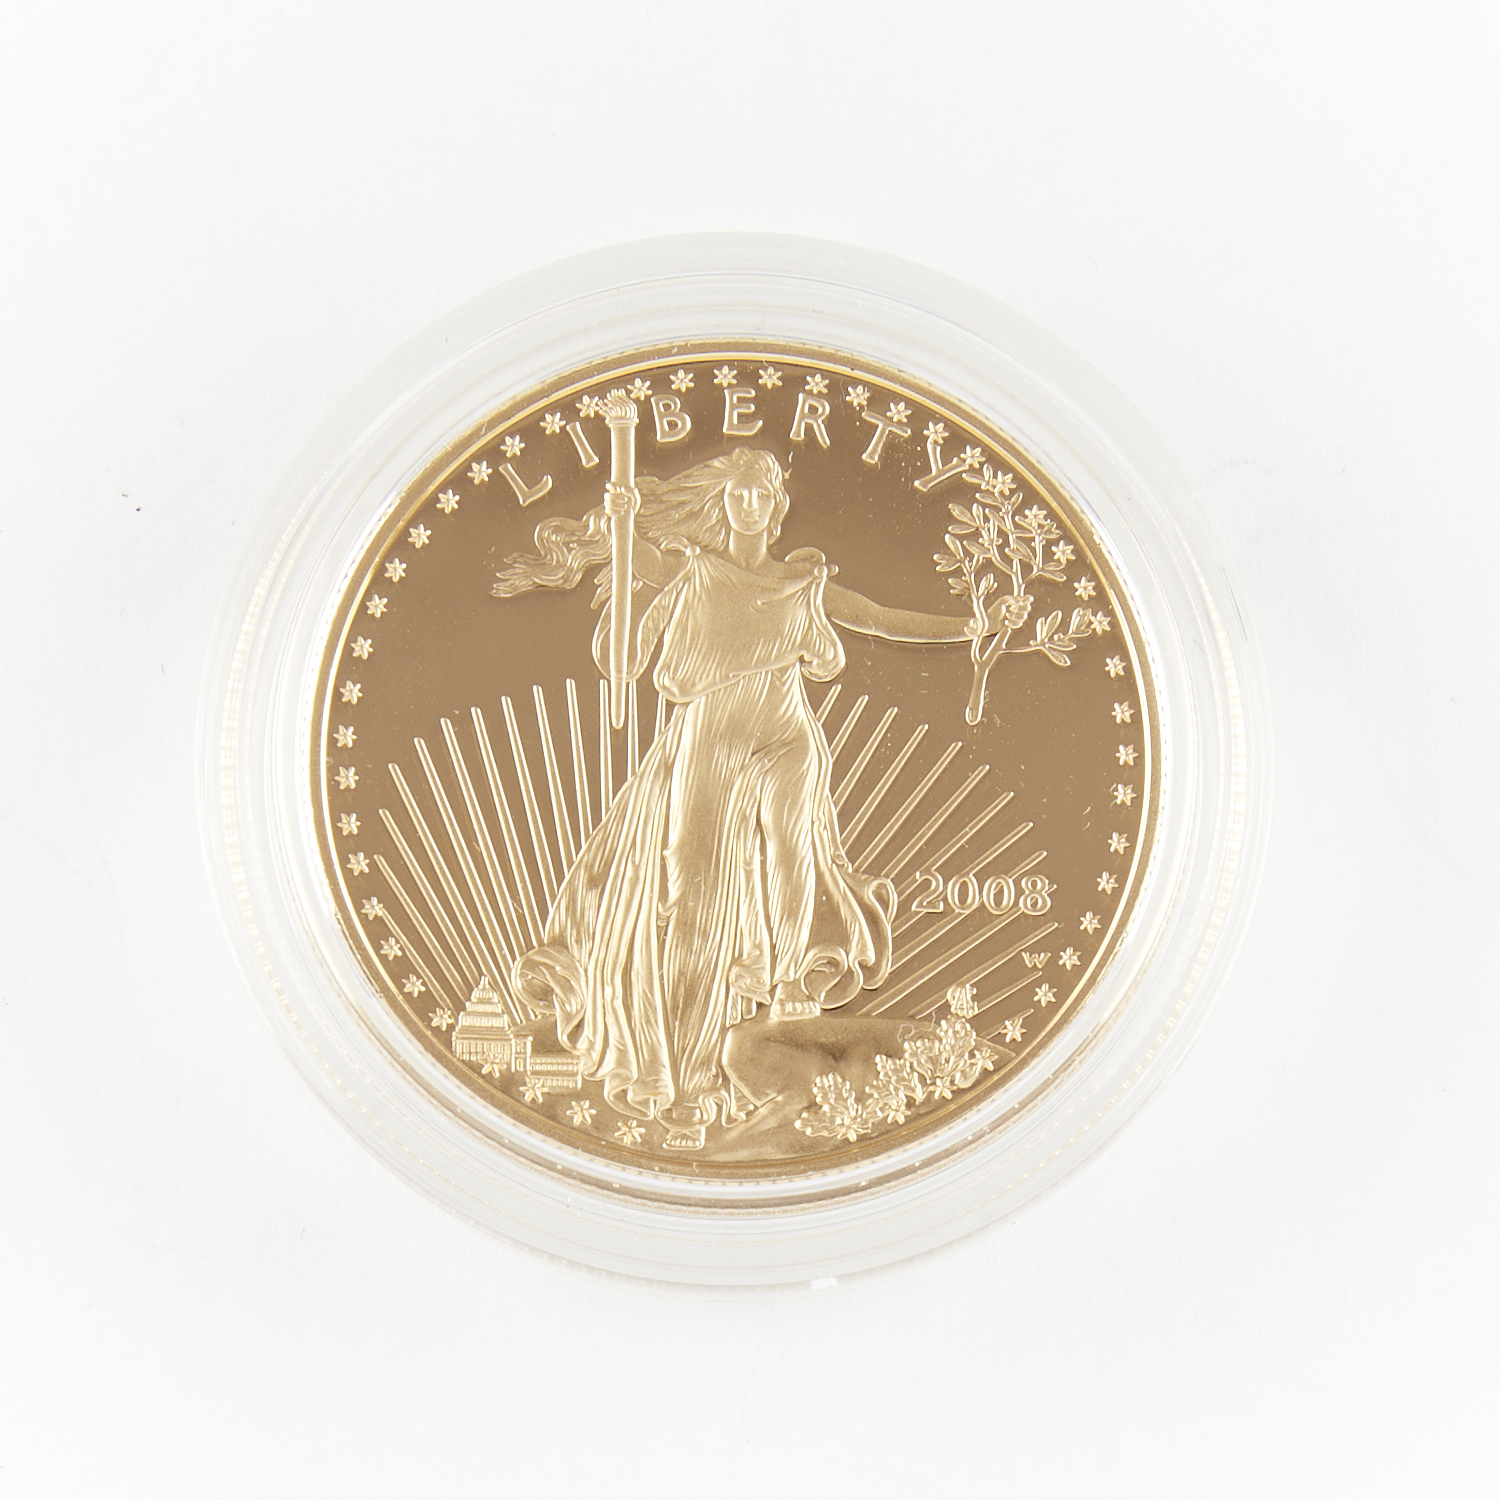 2008 $50 1 oz. Gold American Eagle Proof Coin - Image 2 of 3